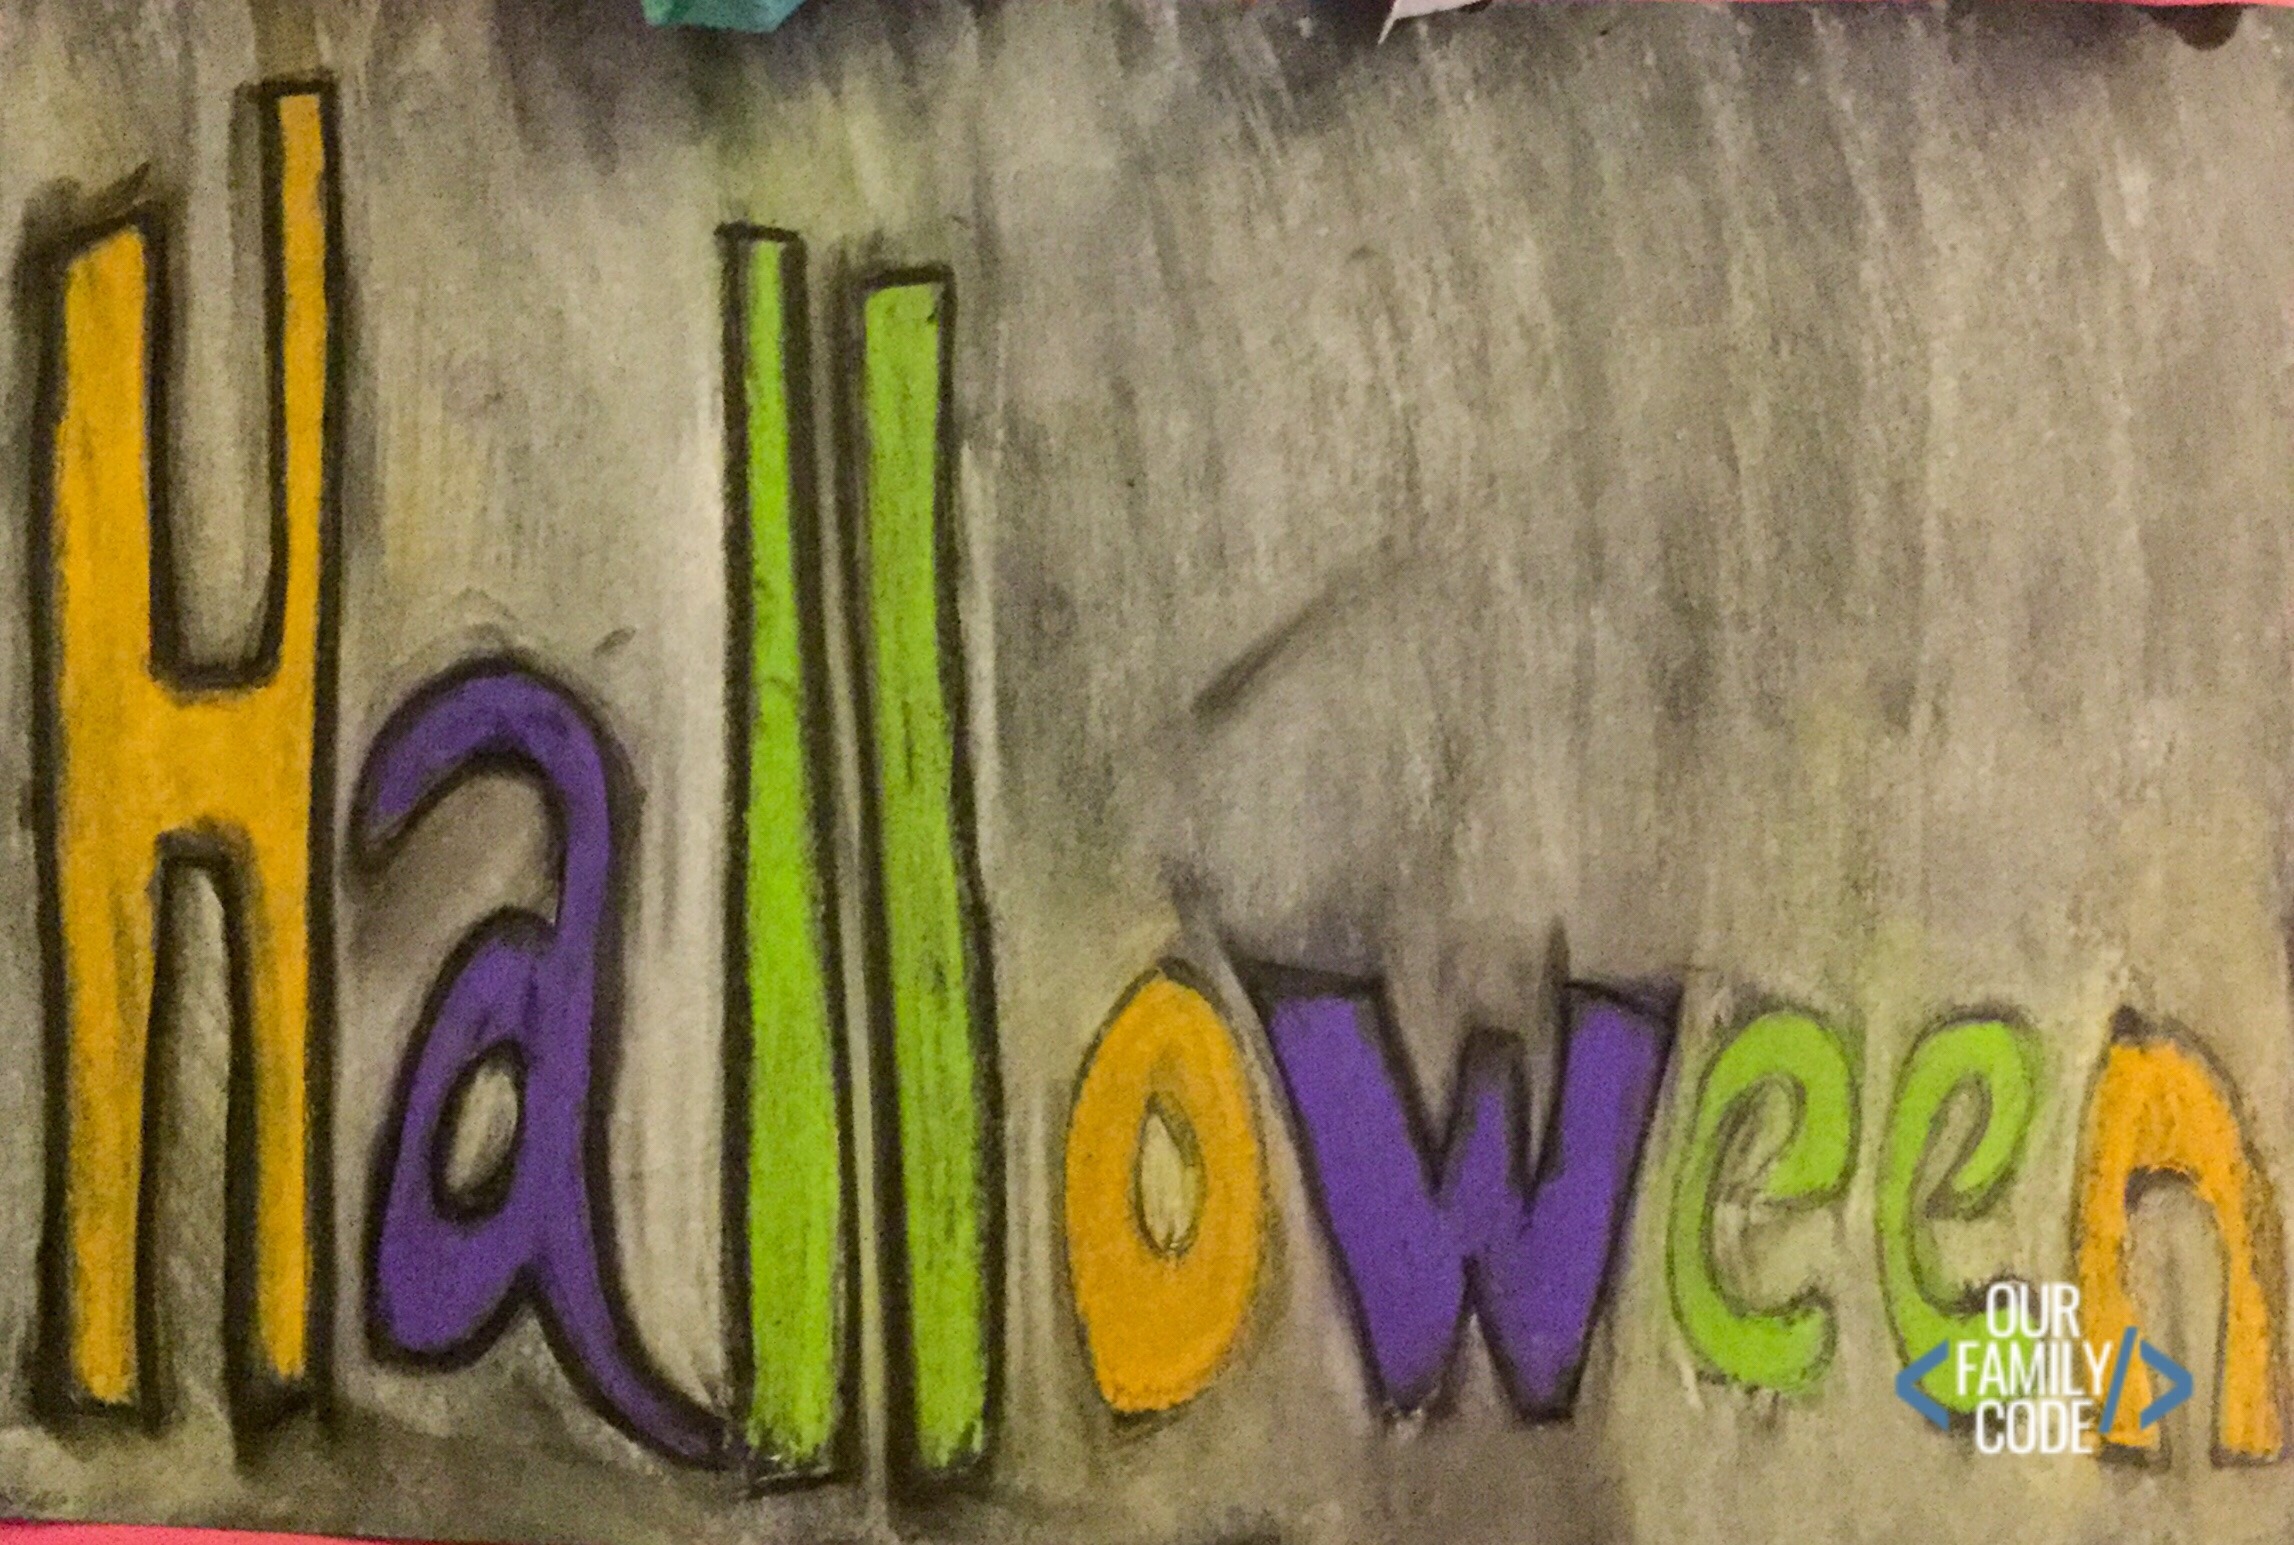 A picture of "Halloween" made with glue resist art.